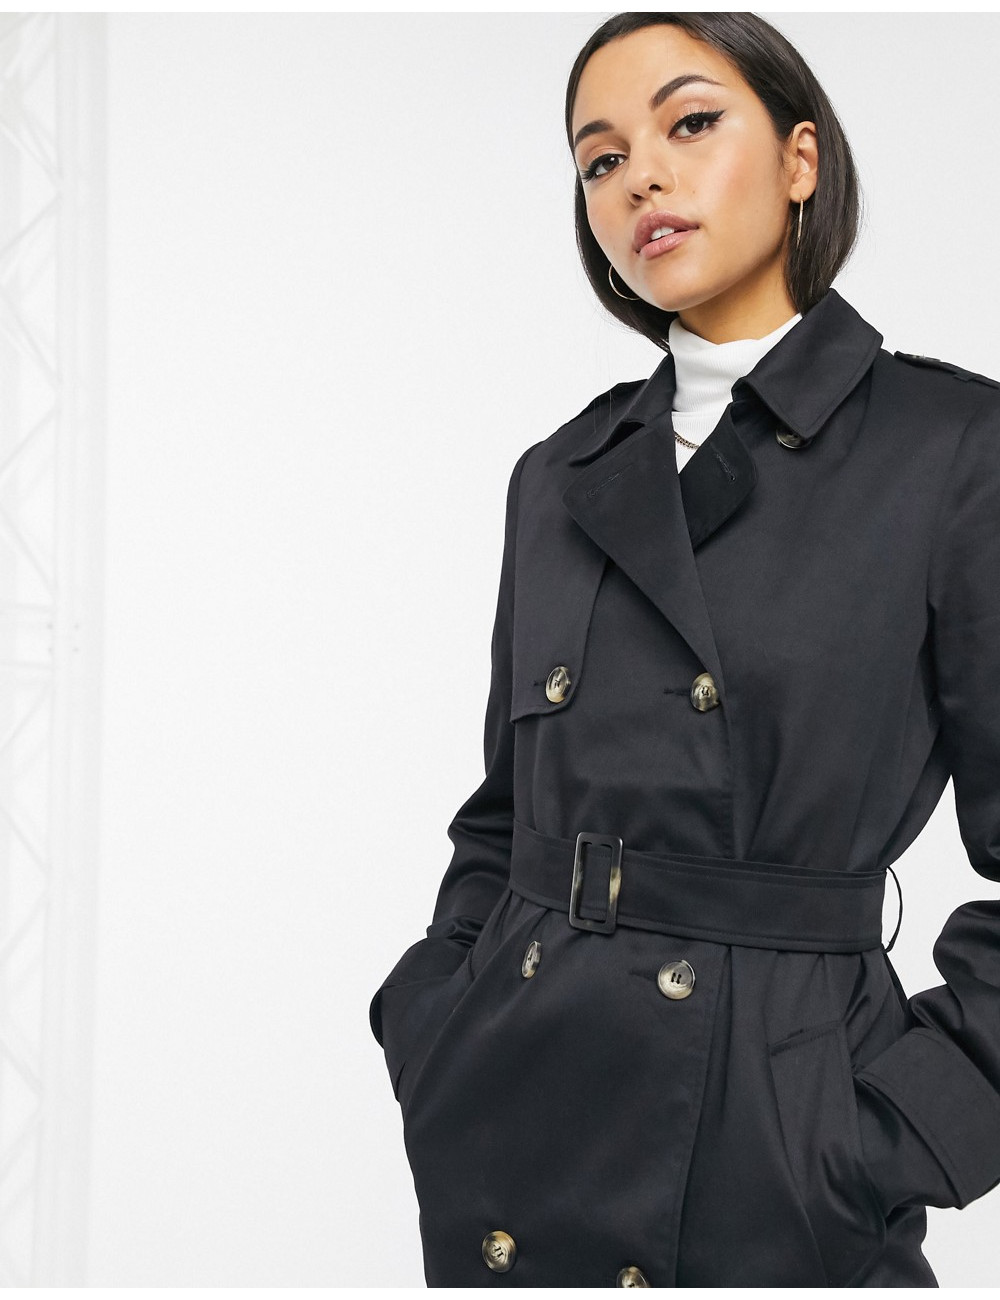 ASOS DESIGN Tall trench...